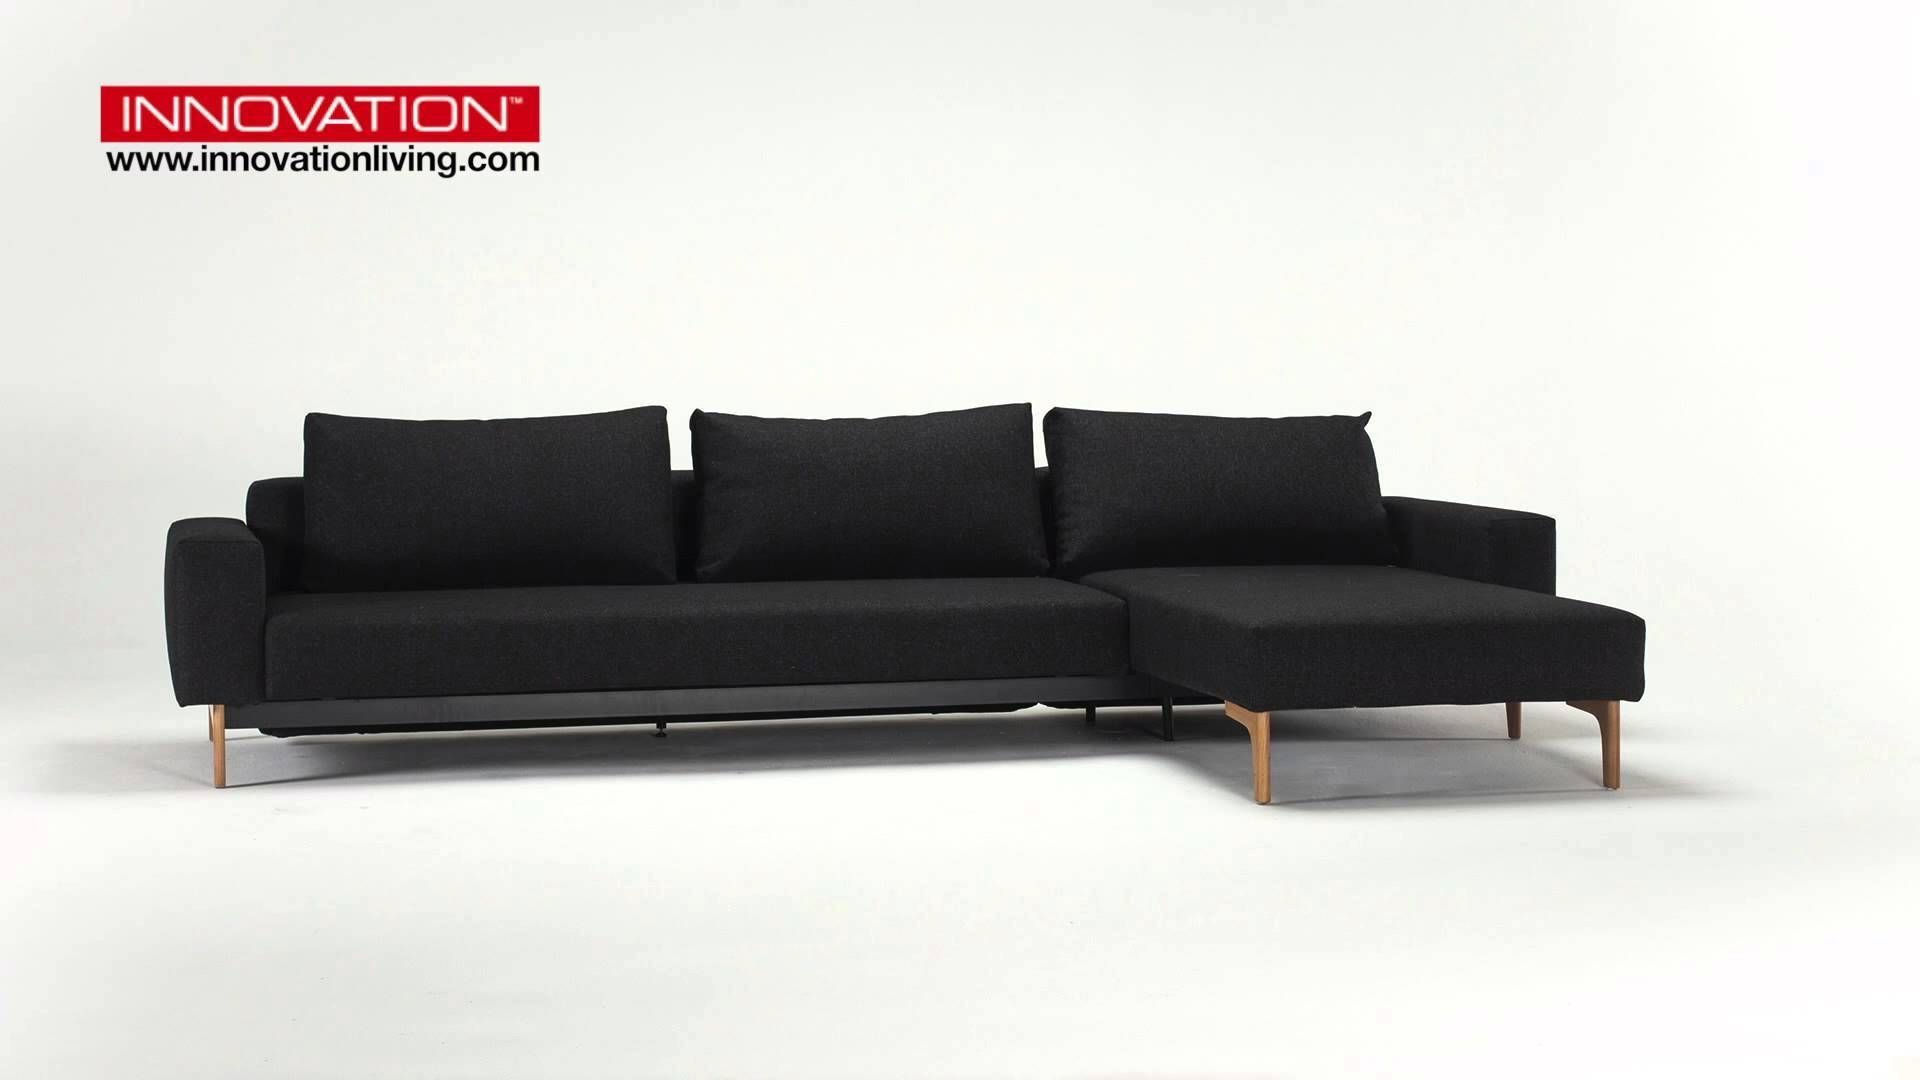 Idun Sofa Bed Lounger 564 Innovation Moma Studio – Youtube With Regard To Sofa Lounger Beds (View 26 of 30)